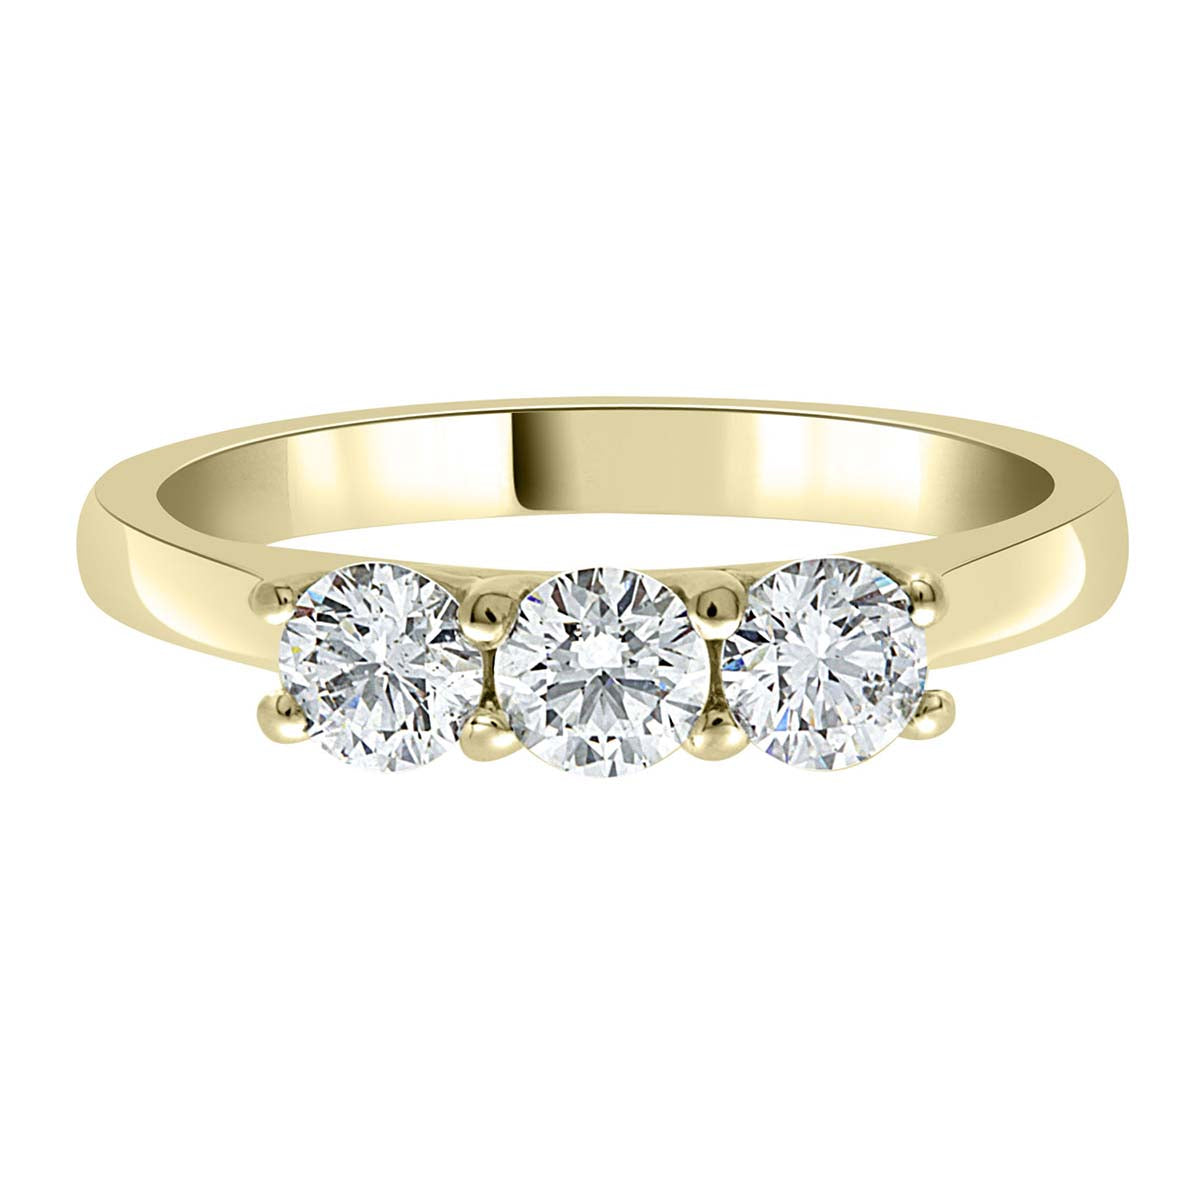 Three Stone Engagement Ring made of yellow gold